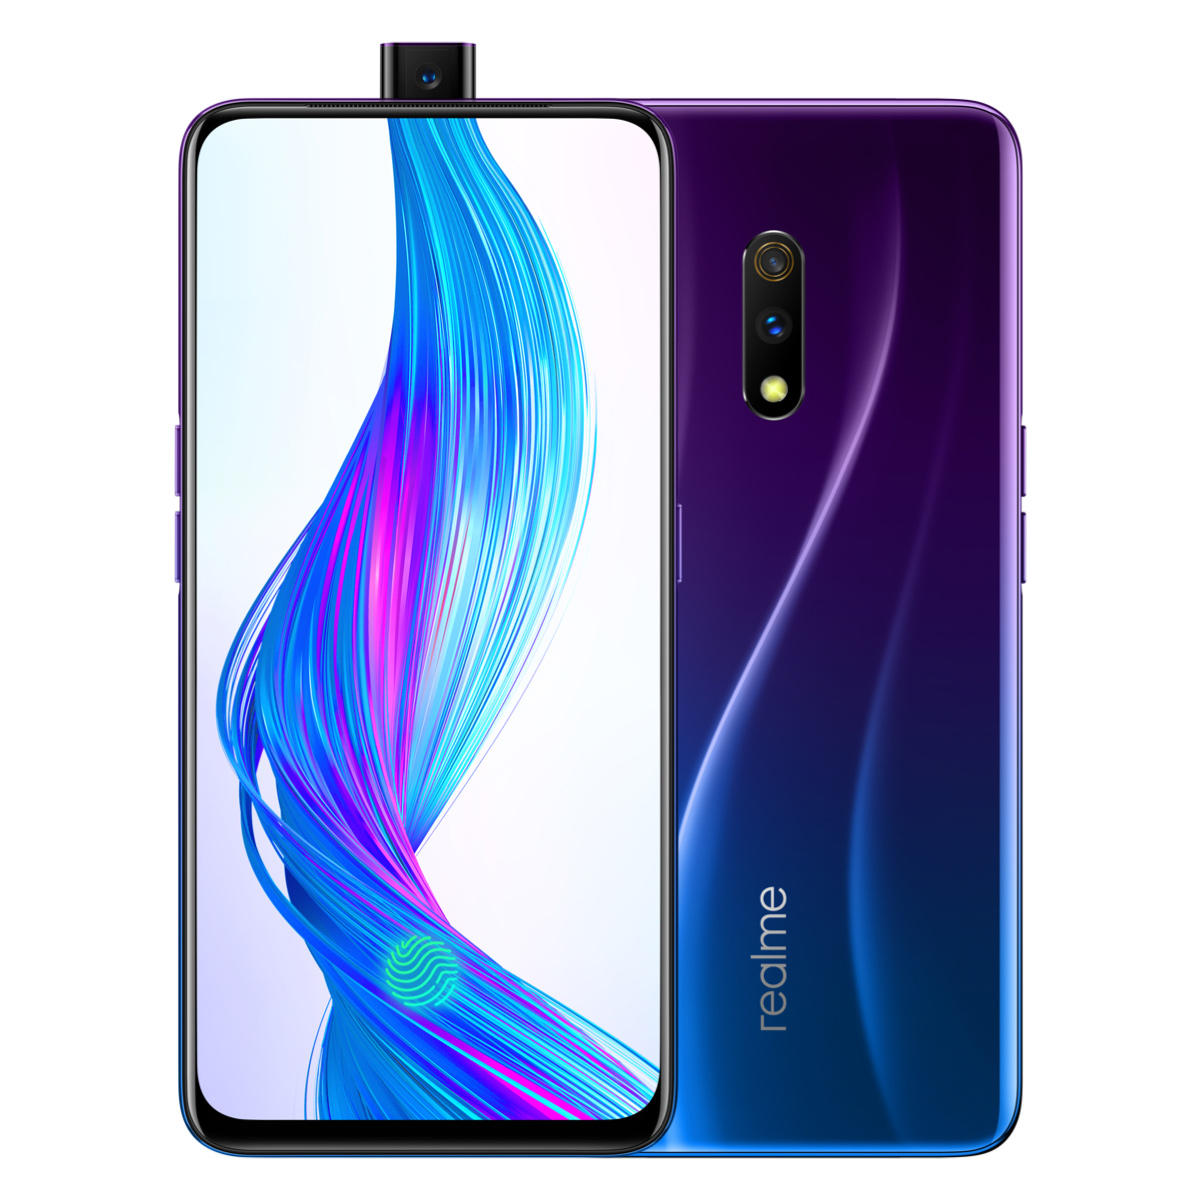 £269.26 15% OPPO Realme X 6.53 Inch FHD+ AMOLED 3765mAh 6GB RAM 64GB ROM Snapdragon 710 Octa Core 2.2GHz 4G Smartphone Smartphones from Mobile Phones & Accessories on banggood.com